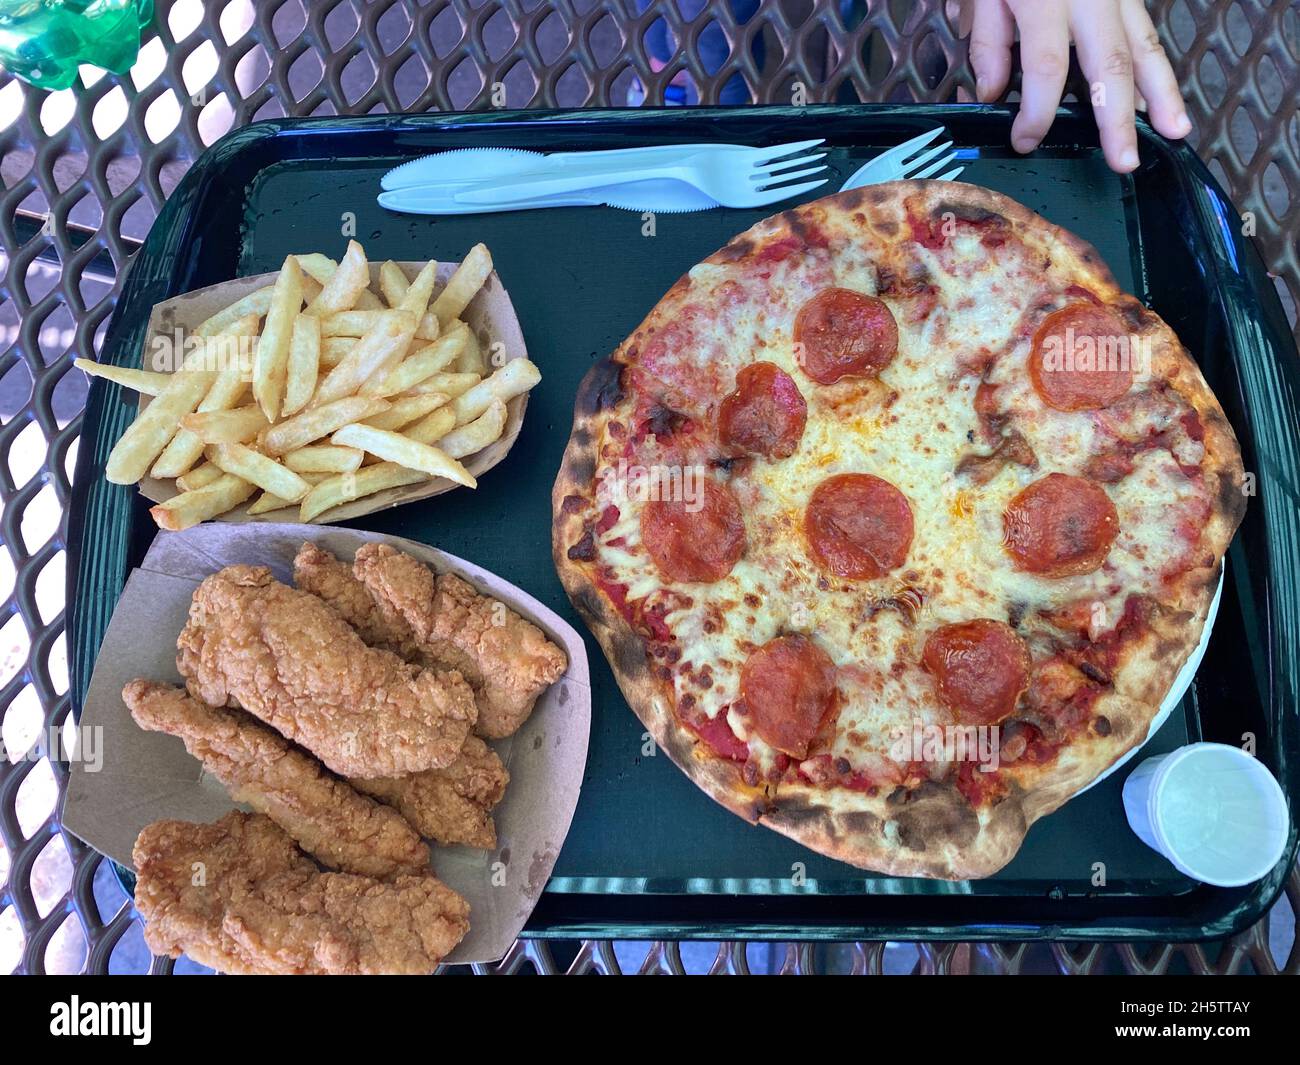 Meal with pepperoni pizza with cheese, chicken tenders and french fries Stock Photo